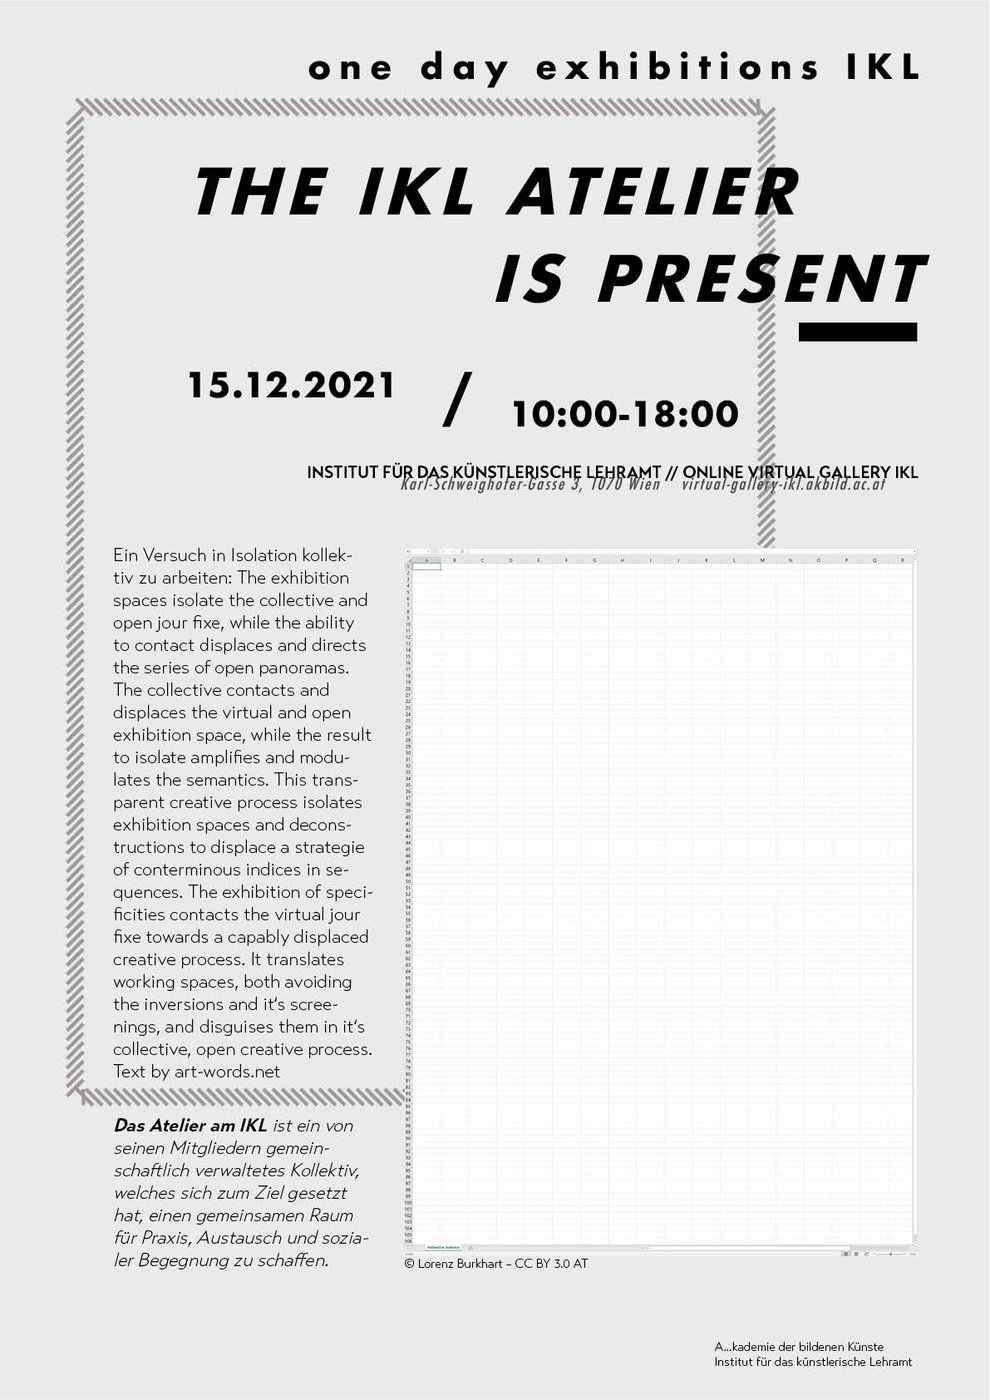 The presentation takes place in the
 
  
   One Day Exhibitions
  
 
 series, in which students from the faculty of
 
  Kunst und Bildung
  
  
 
 and
 
  Gestaltung im Kontext
 
 present artistic and designed works in the context of their work. These  will take place every three weeks in the winter semester 2021/22 online  in the
 
  
   Virtual Gallery IKL
  
 
 (
 
  
   https://virtual-gallery-ikl.akbild.ac.at
  
 
 ).


 The event will take place online. The Zoom room will be open between 10:00 and 18:00 and can be visited at any time at:
 
  https://akbild-ac-at.zoom.us/j/98250299038?pwd=cld2M25jSkJzb2dhblNhTXhUMWJGQT09